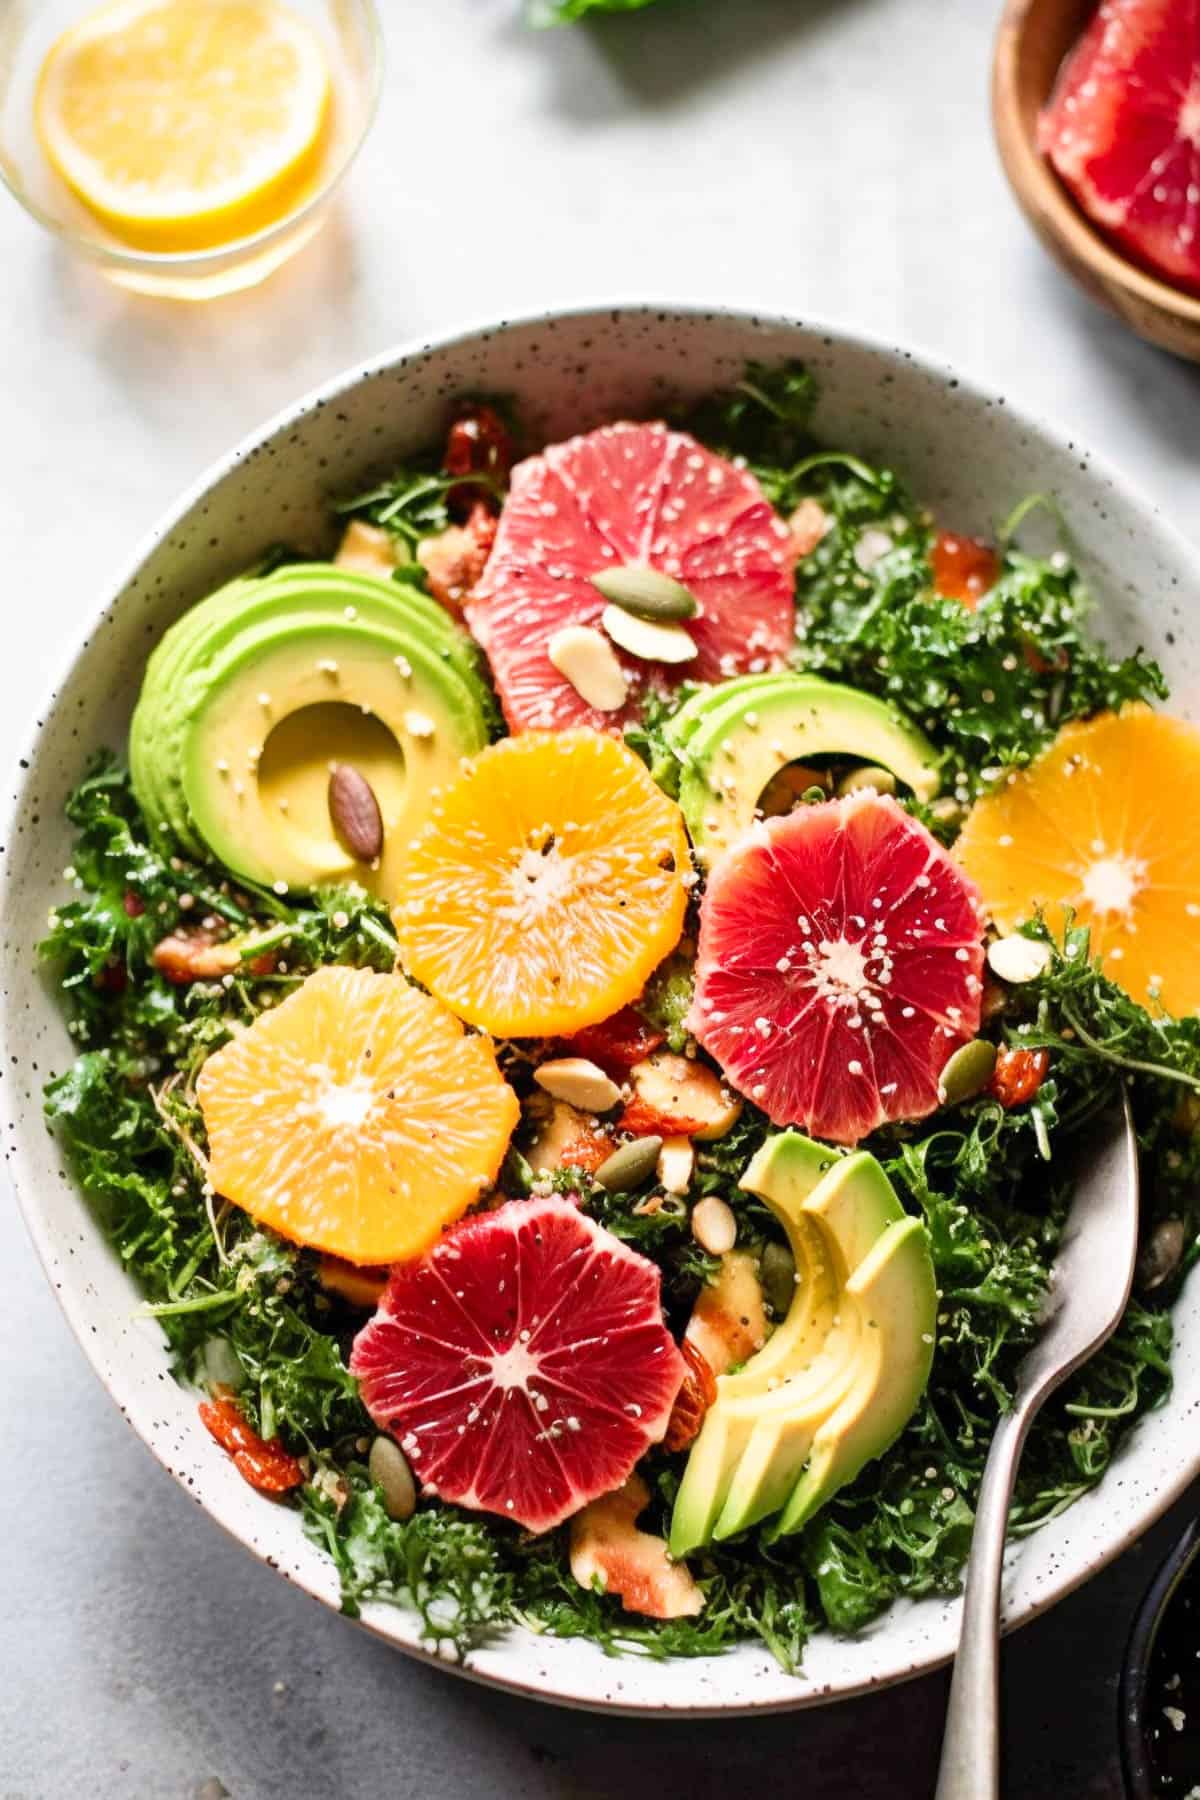 Kale citrus salad with oranges and avocado in a bowl with nuts and seeds.